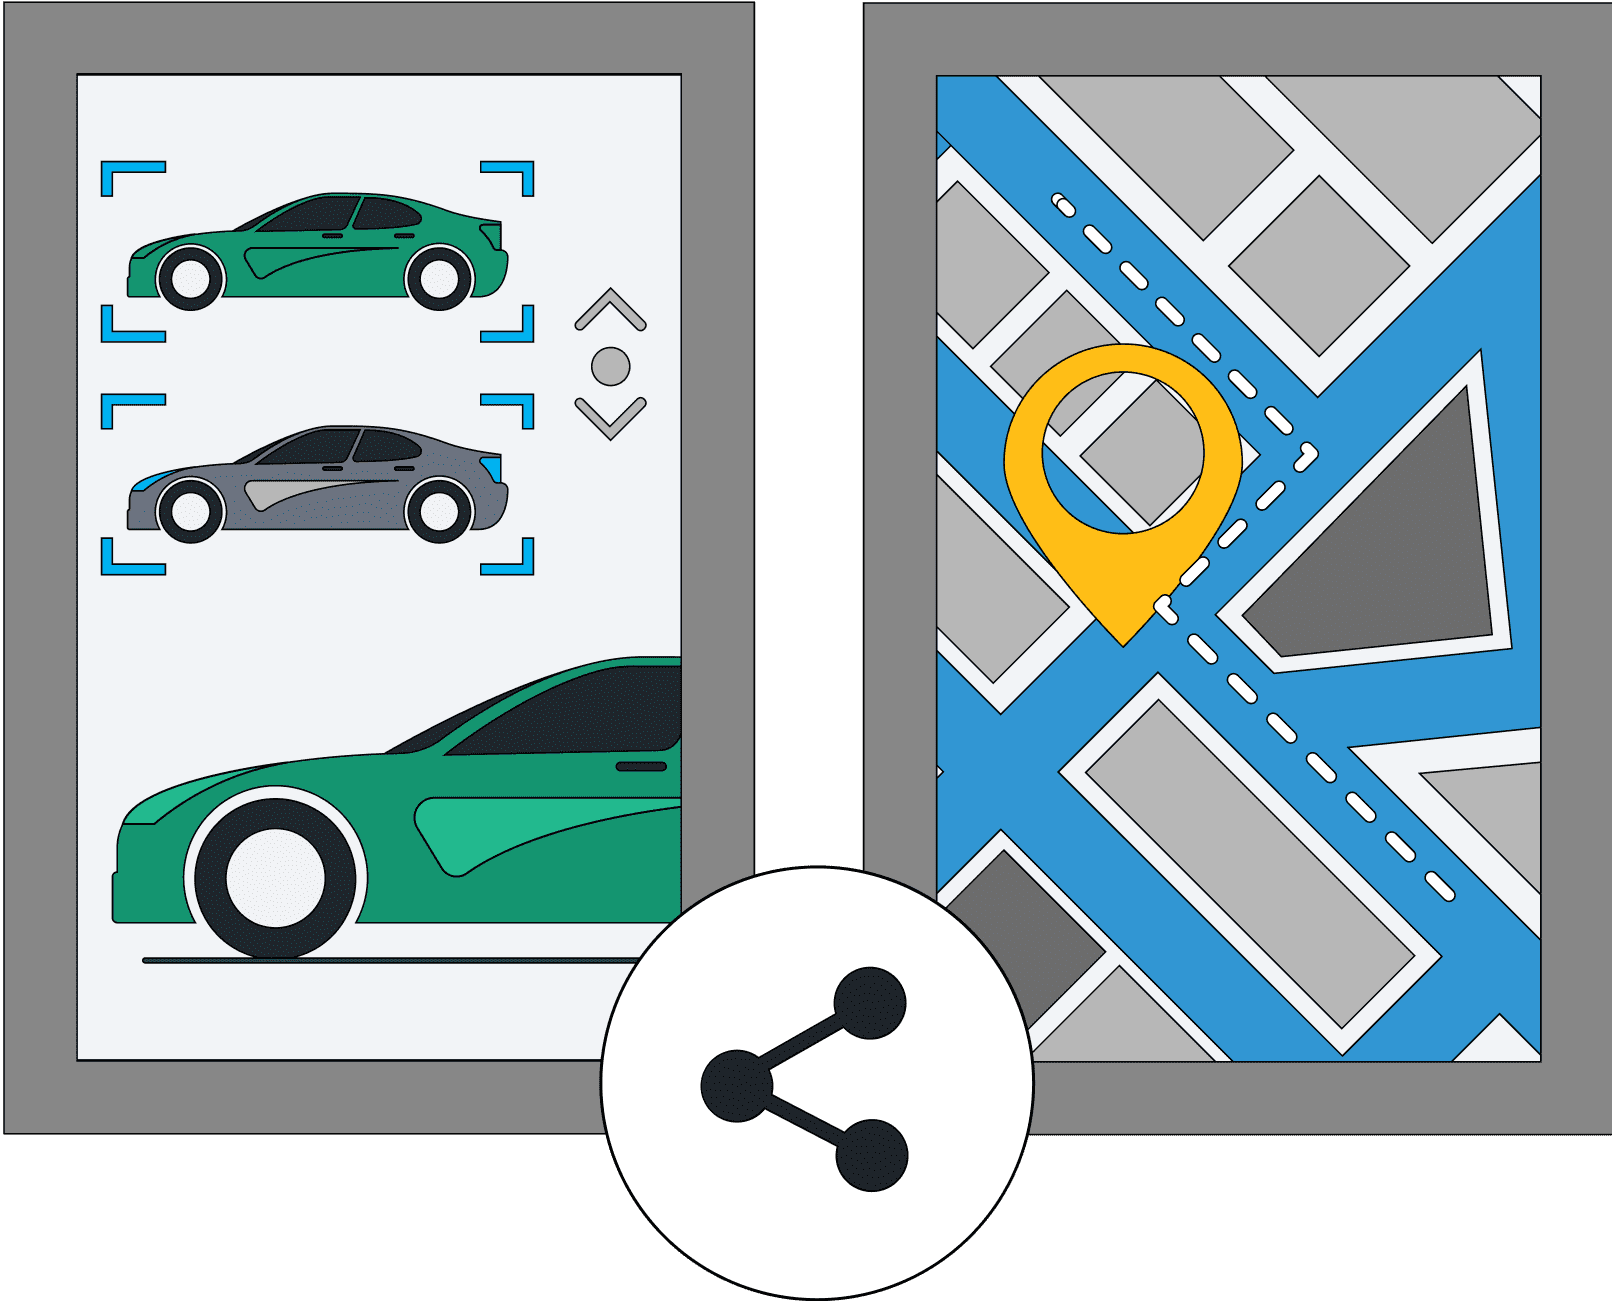 Example application screens of vehicle selection and maps